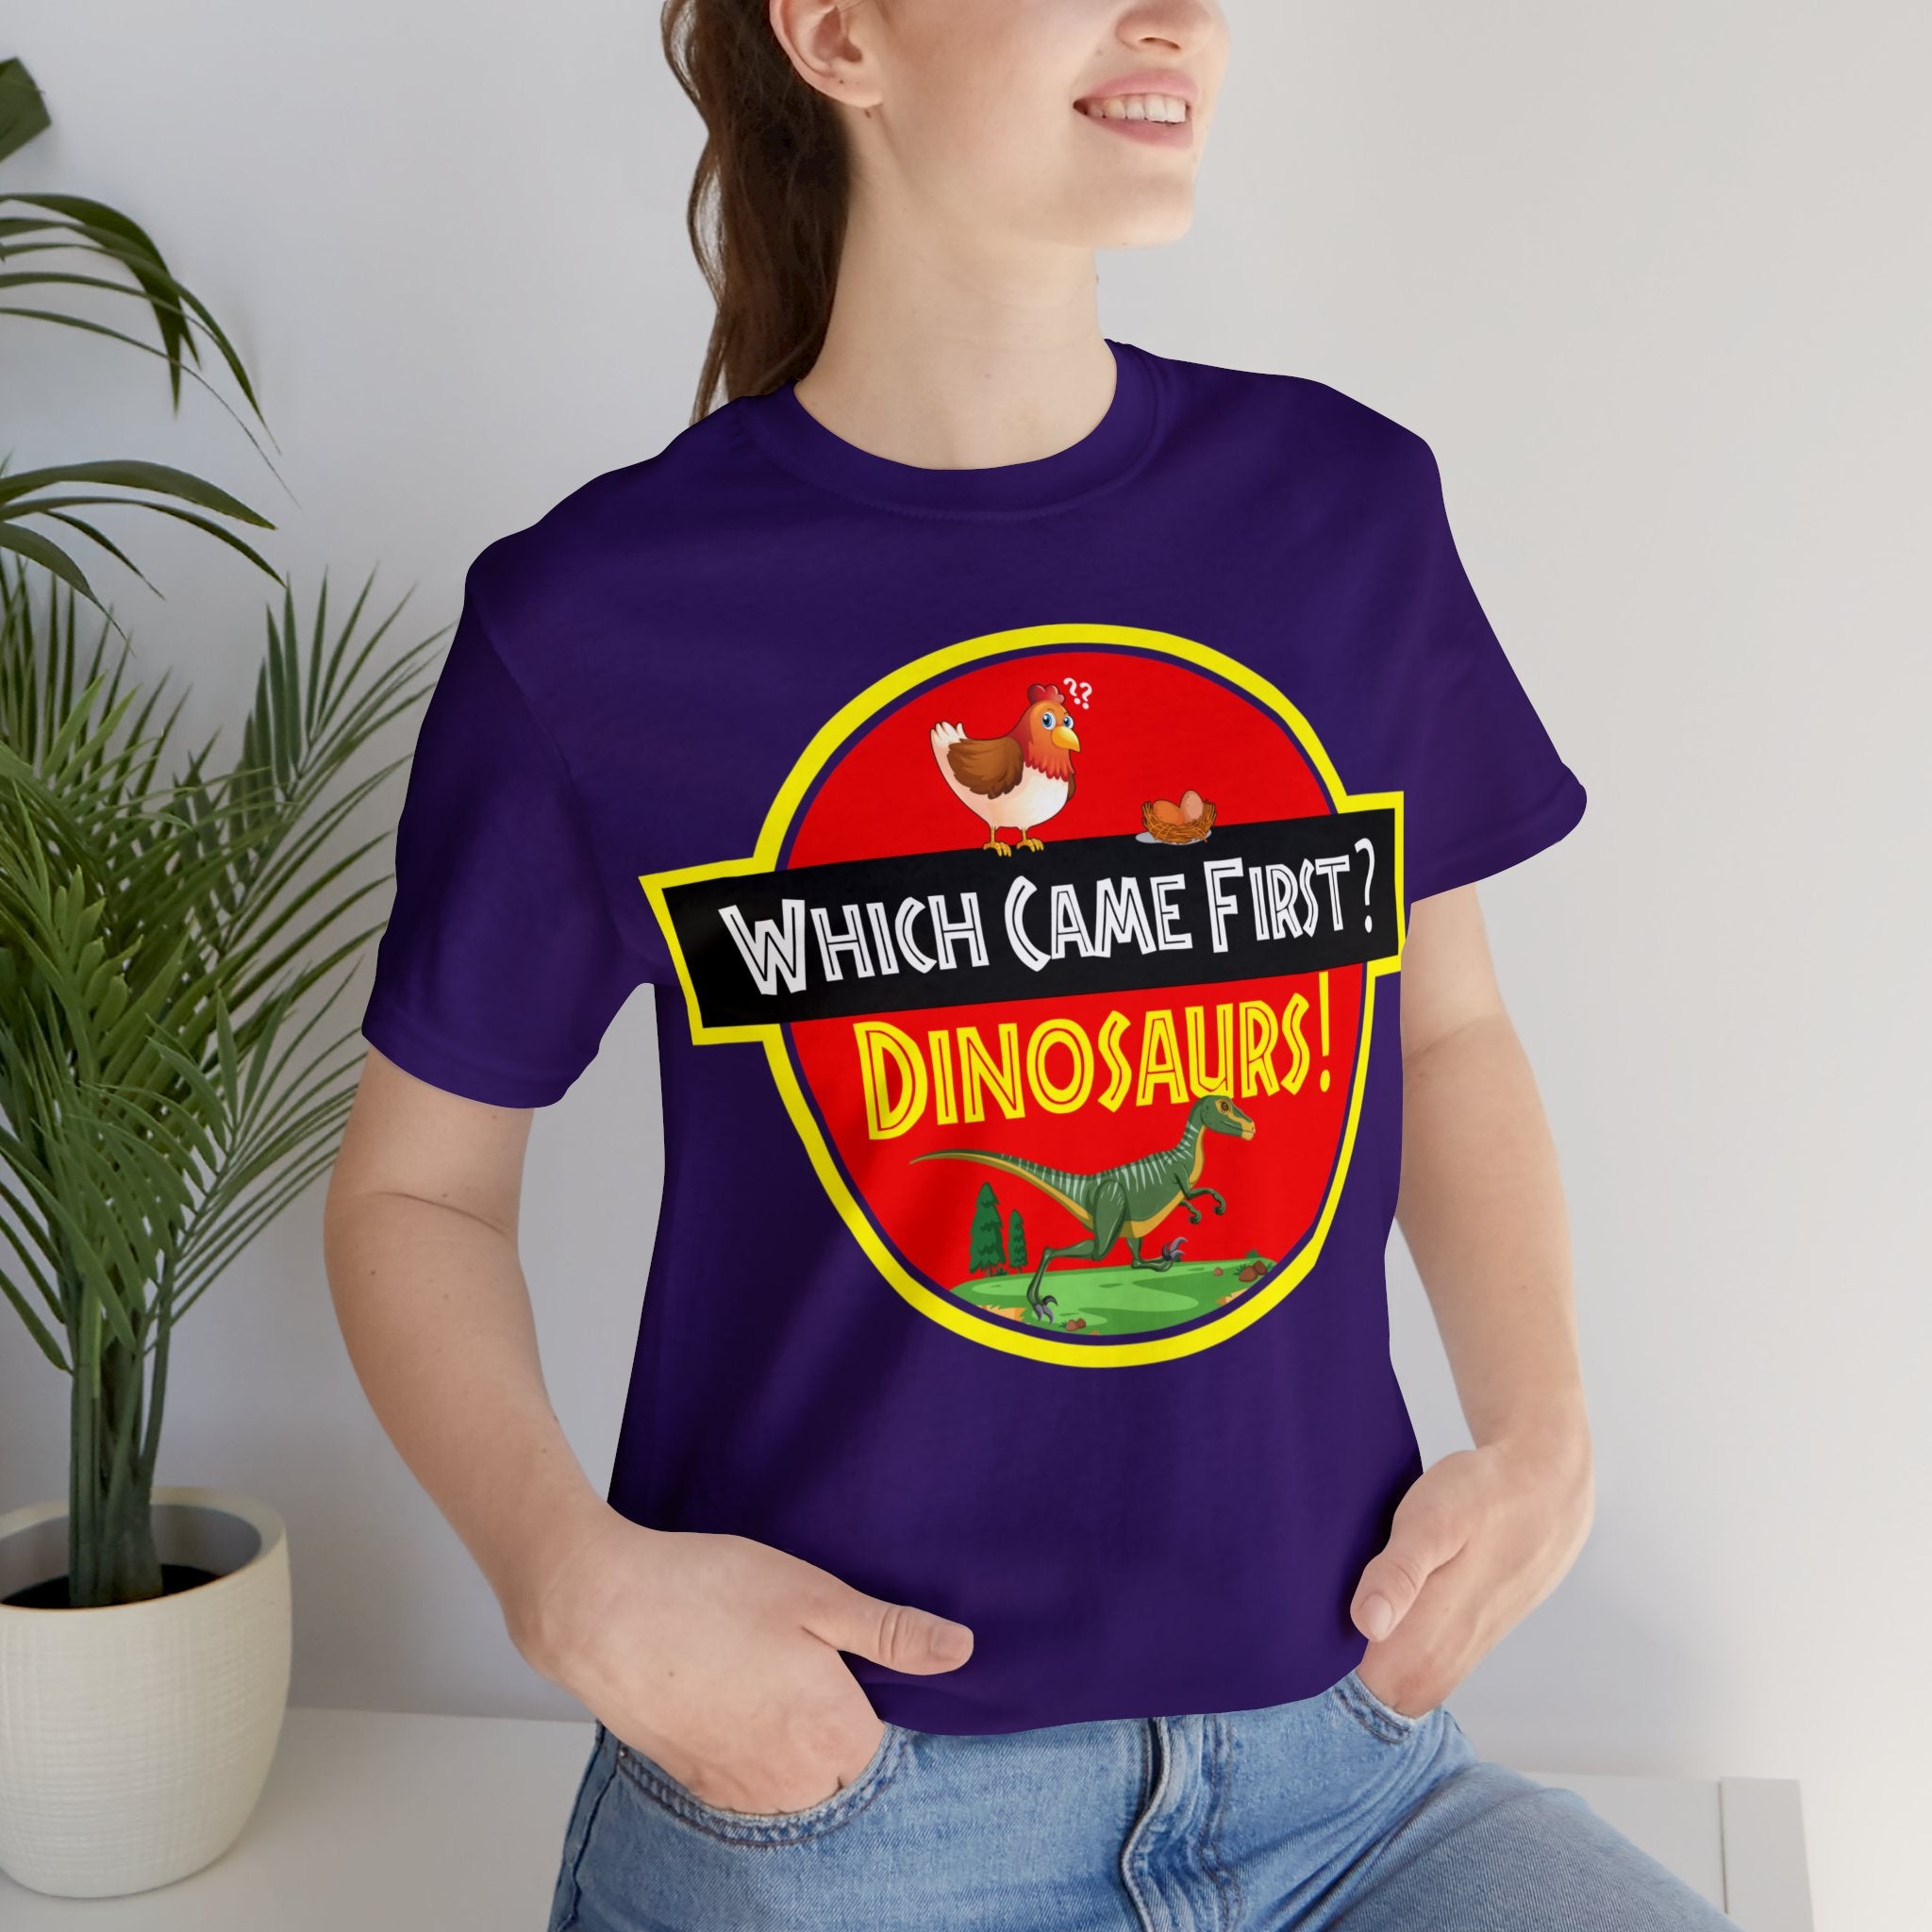 Which Came First - Dinosaurs [Adult T-shirt]